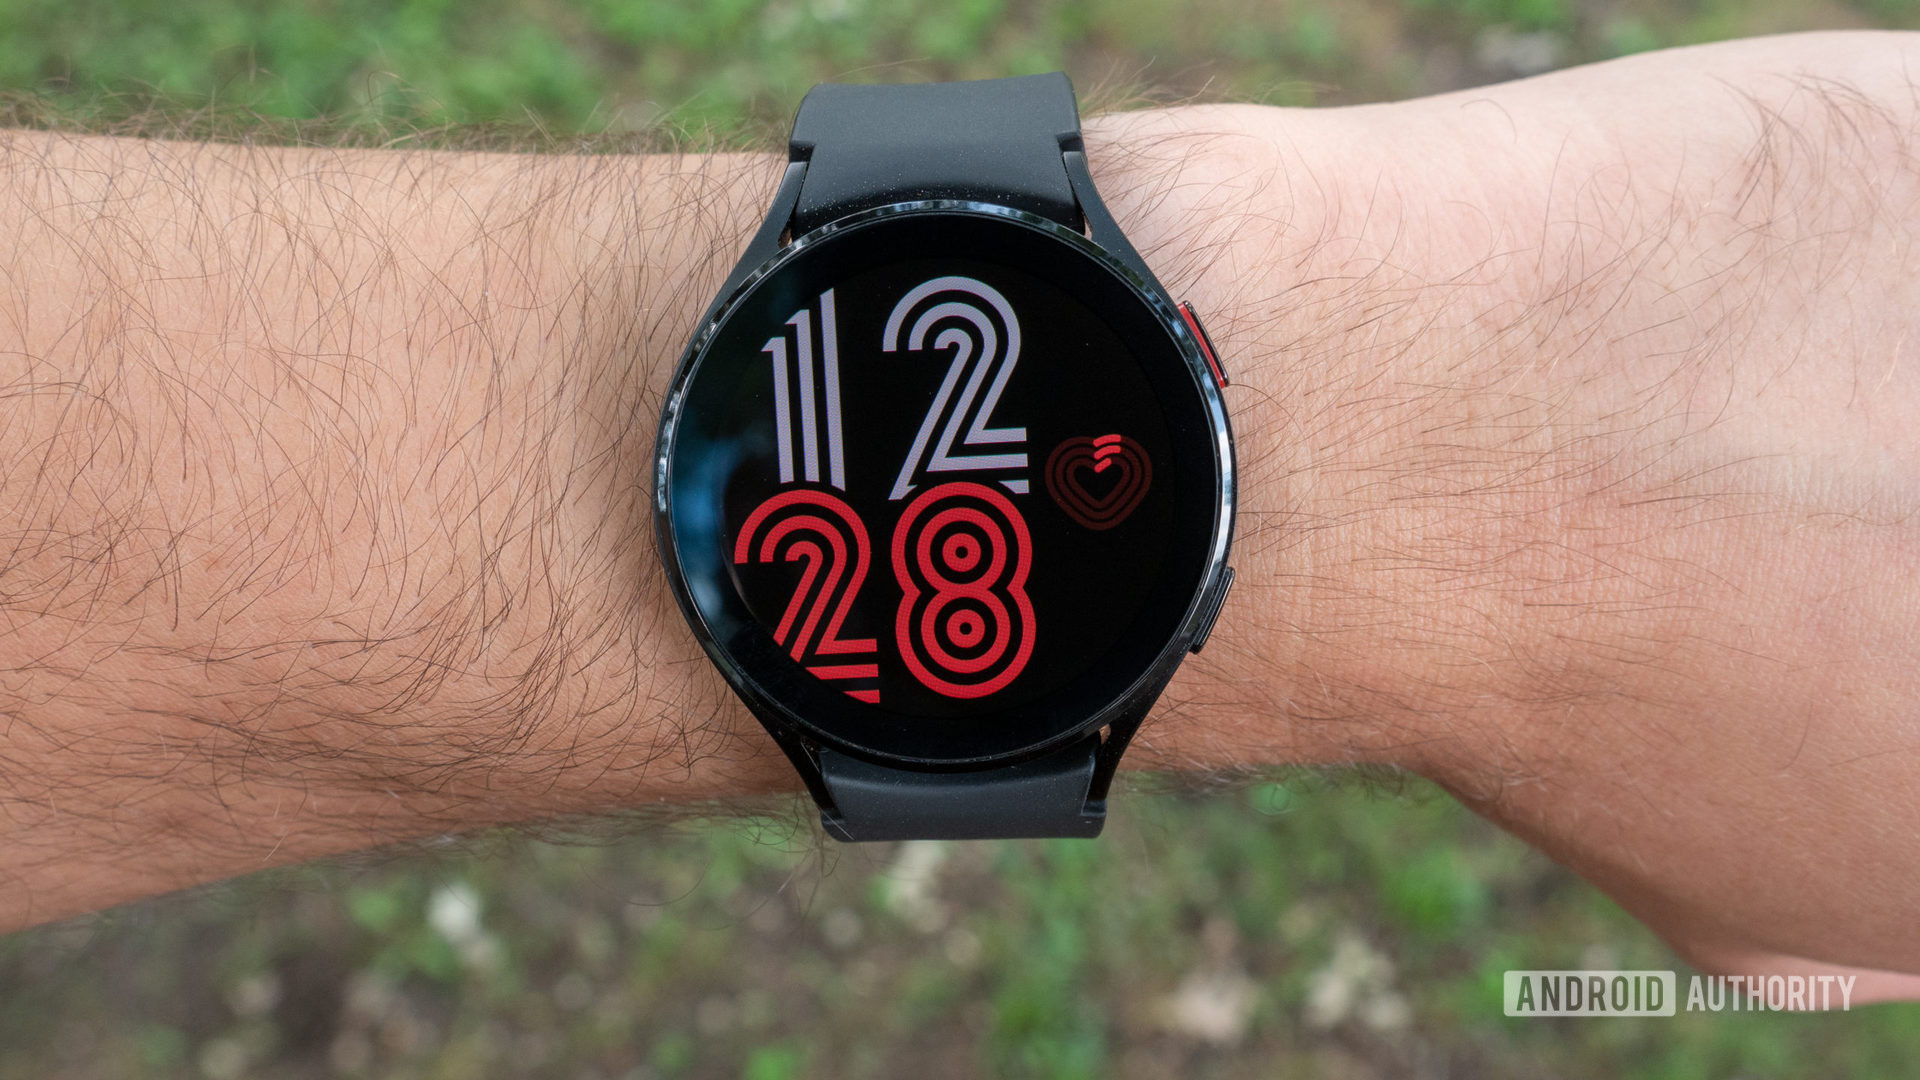 The Samsung Galaxy Watch 4 on a wrist displays a watch face with oversized numerals.